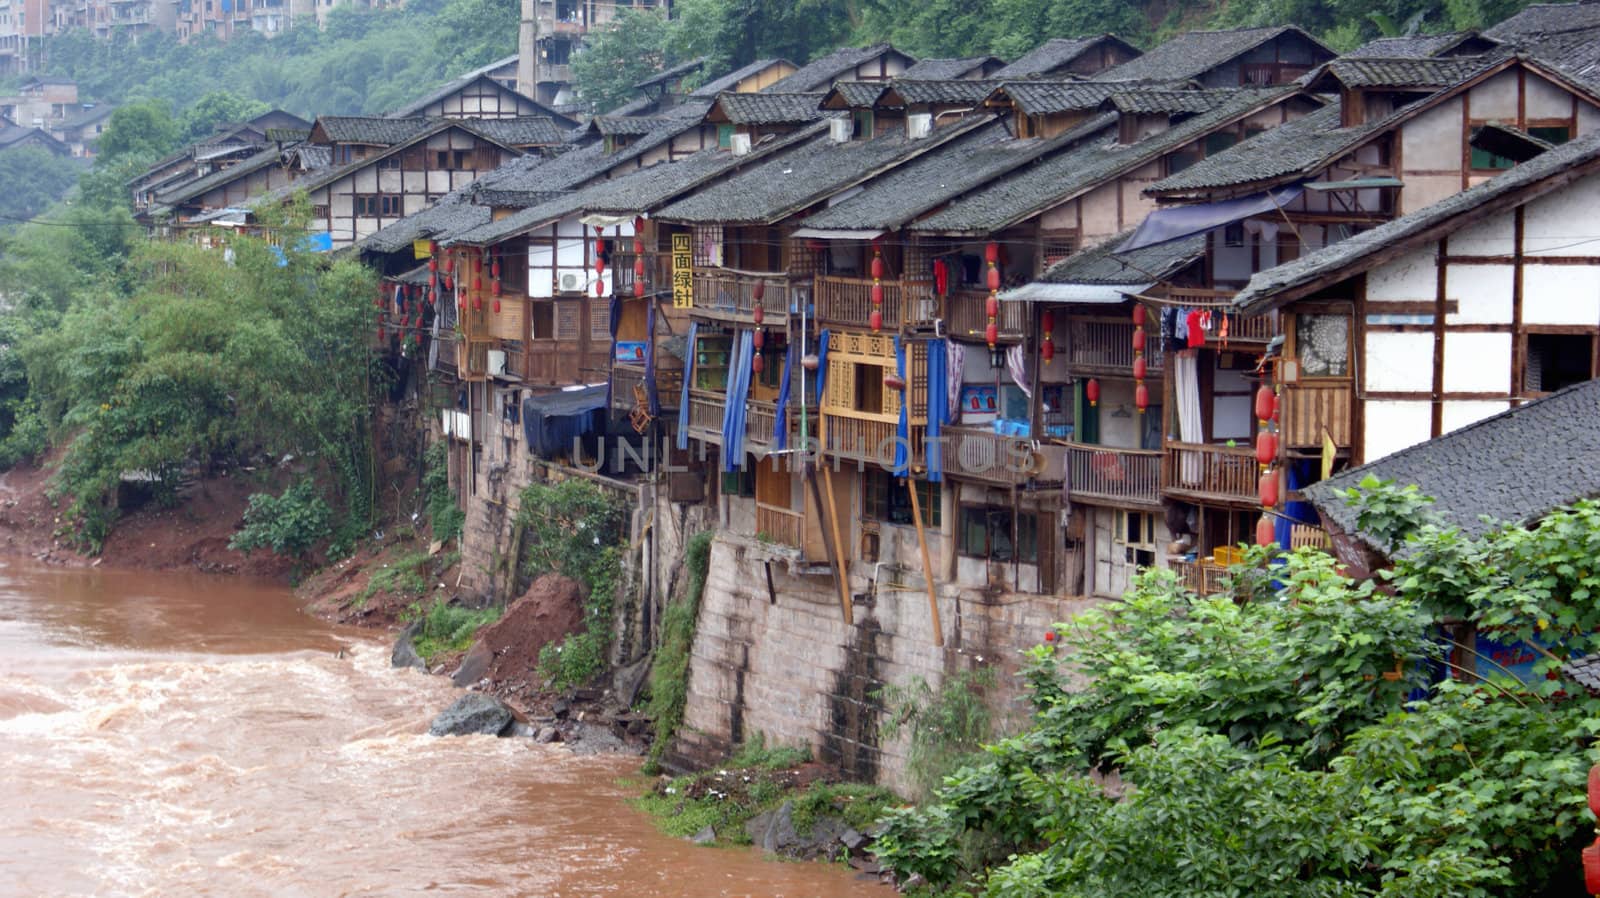 VILLAGE IN CHINA